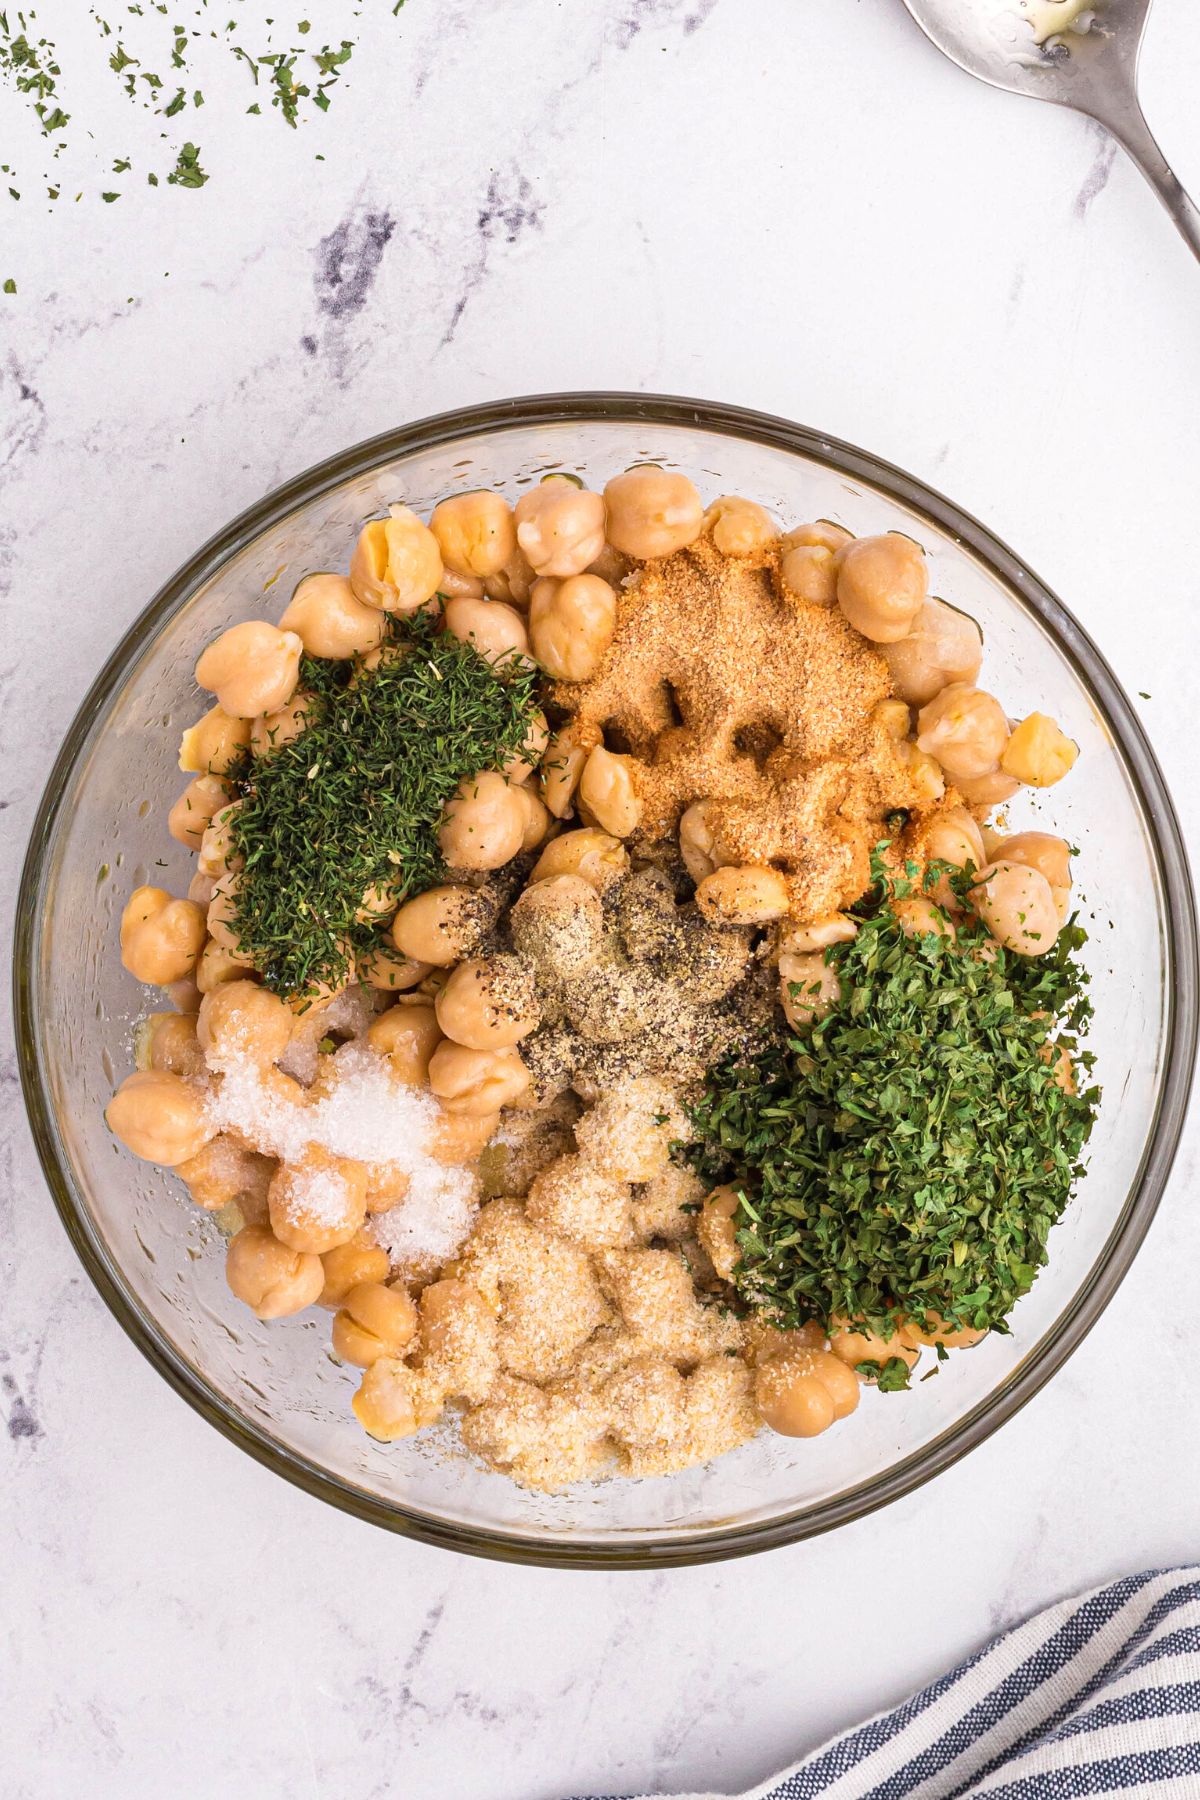 Chickpeas mixed with seasonings in a clear glass bowl